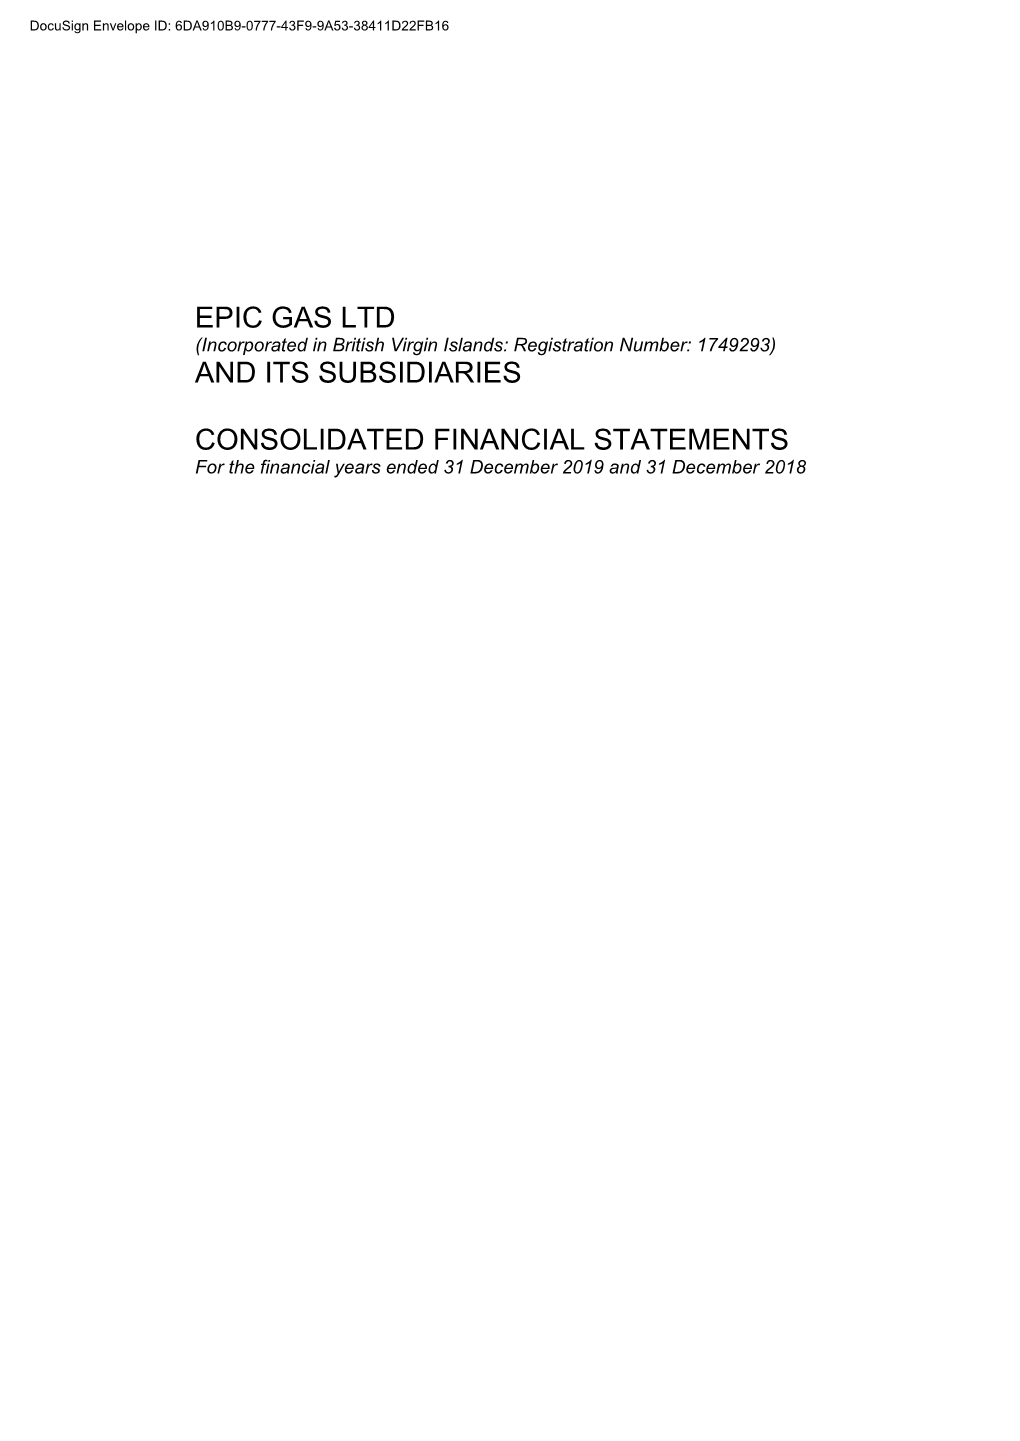 Epic Gas Ltd and Its Subsidiaries Consolidated